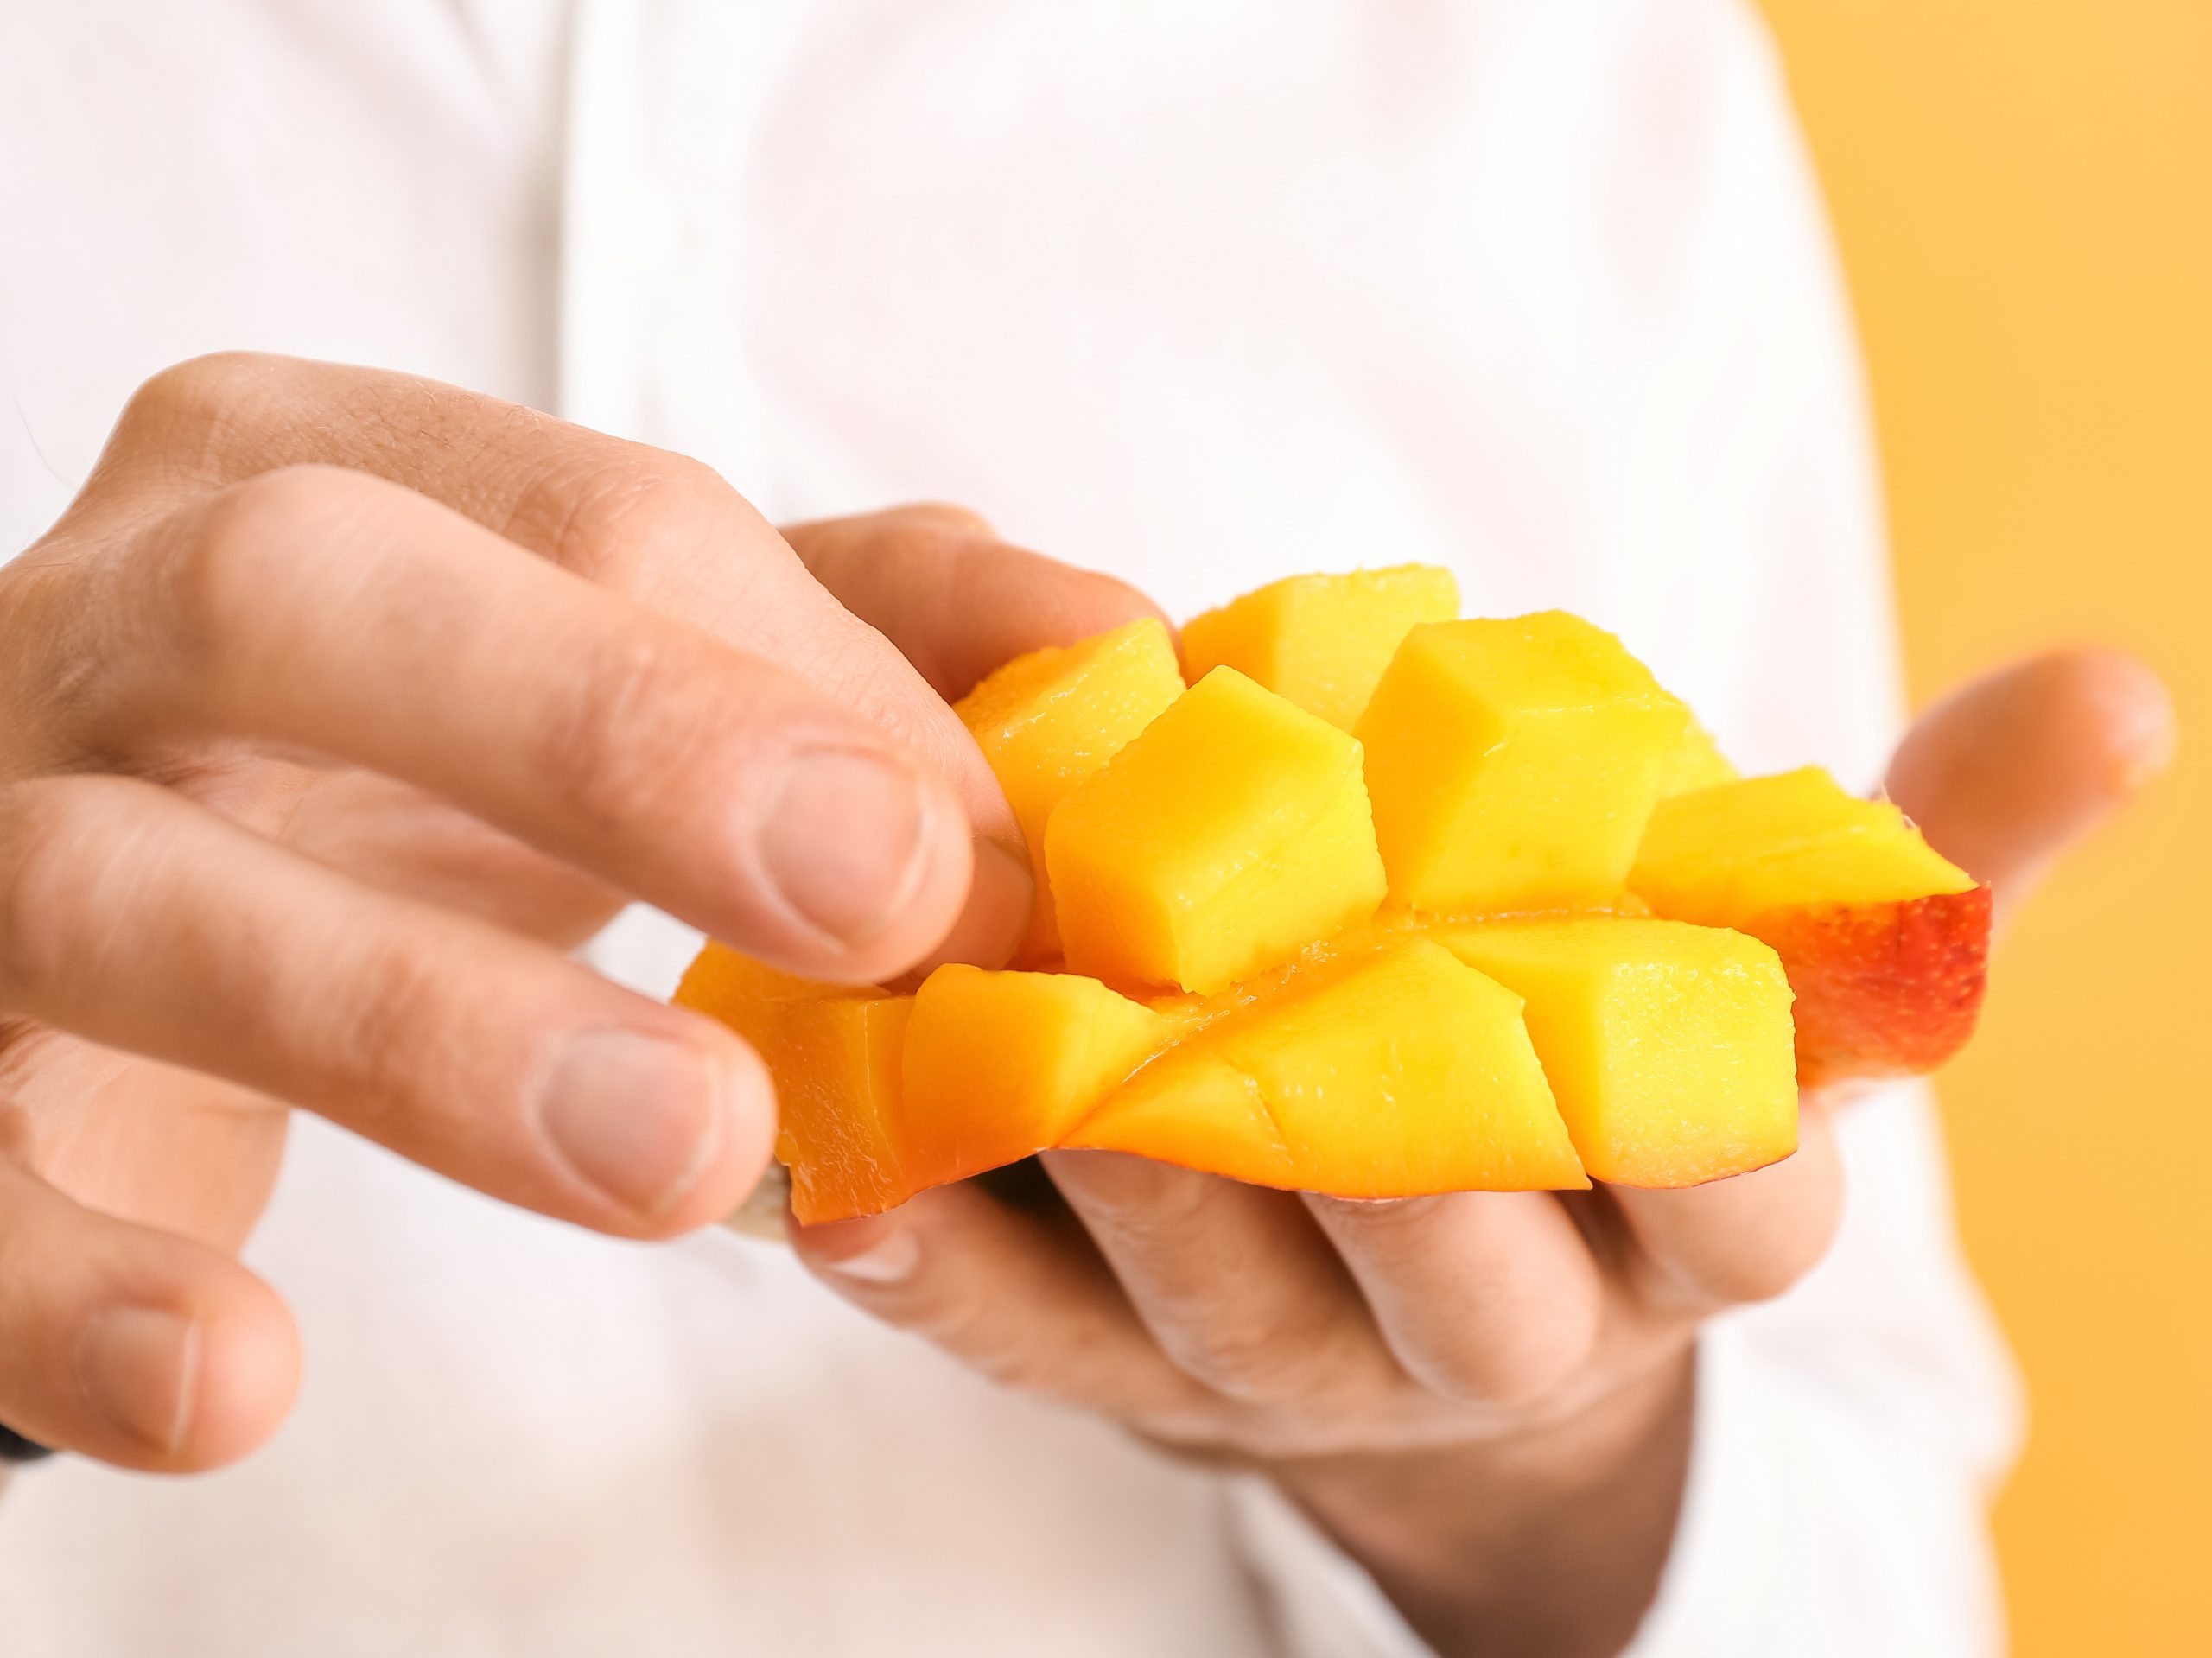 As another bumper season begins Down Under, Perfection Fresh CEO Michael Simonetta talks with Fresh Plaza about the company’s plans for a mango-led global expansion.